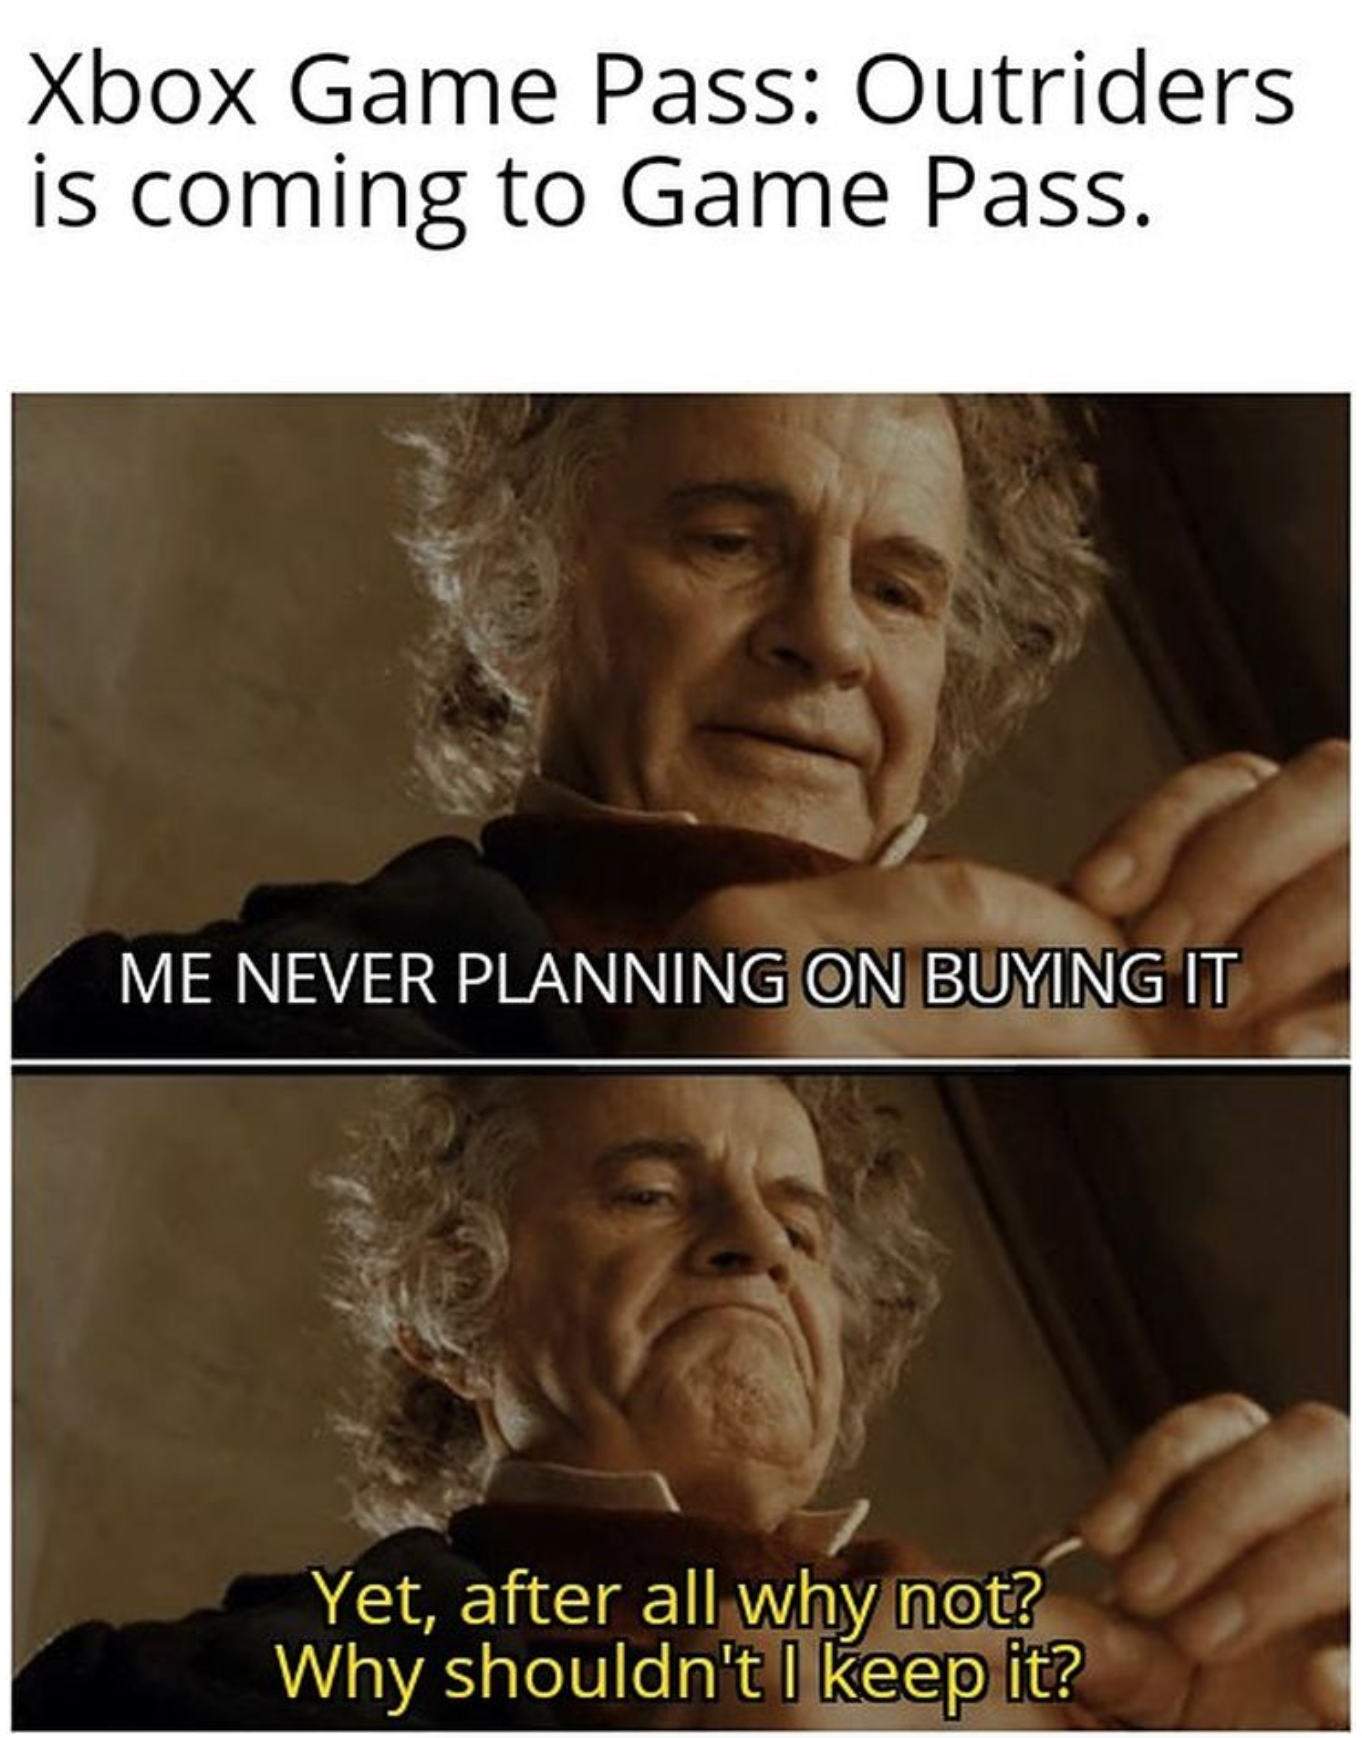 Outriders Memes - memes funny - Xbox Game Pass Outriders is coming to Game Pass. Me Never Planning On Buying It Yet, after all why not? Why shouldn't I keep it?